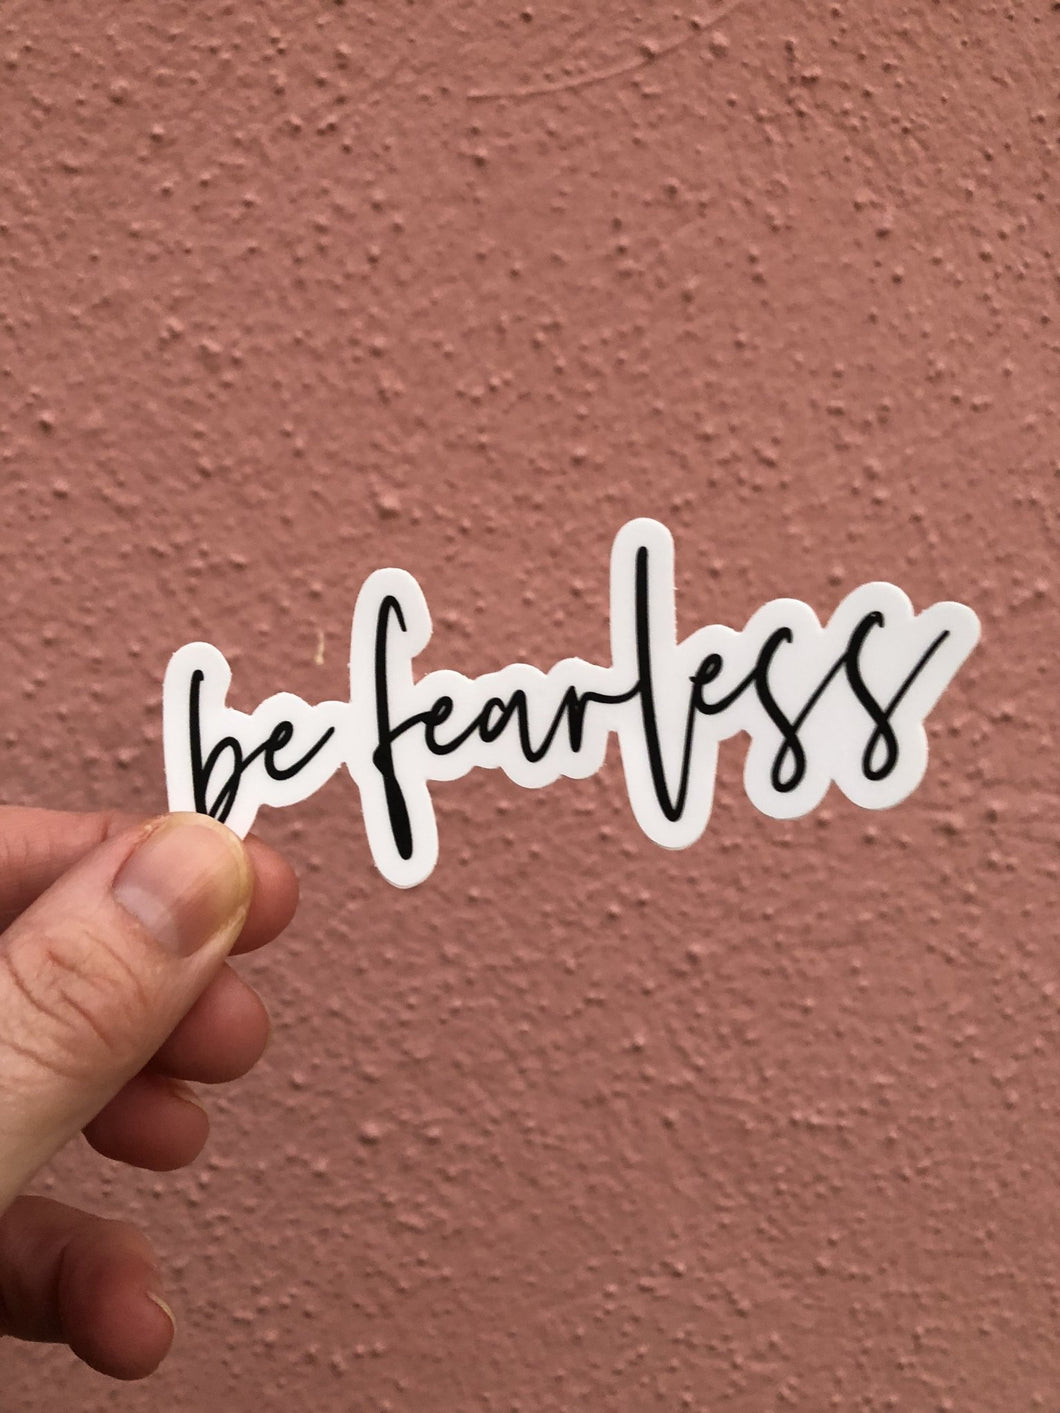 be fearless Sticker - Be Kind 2 Me